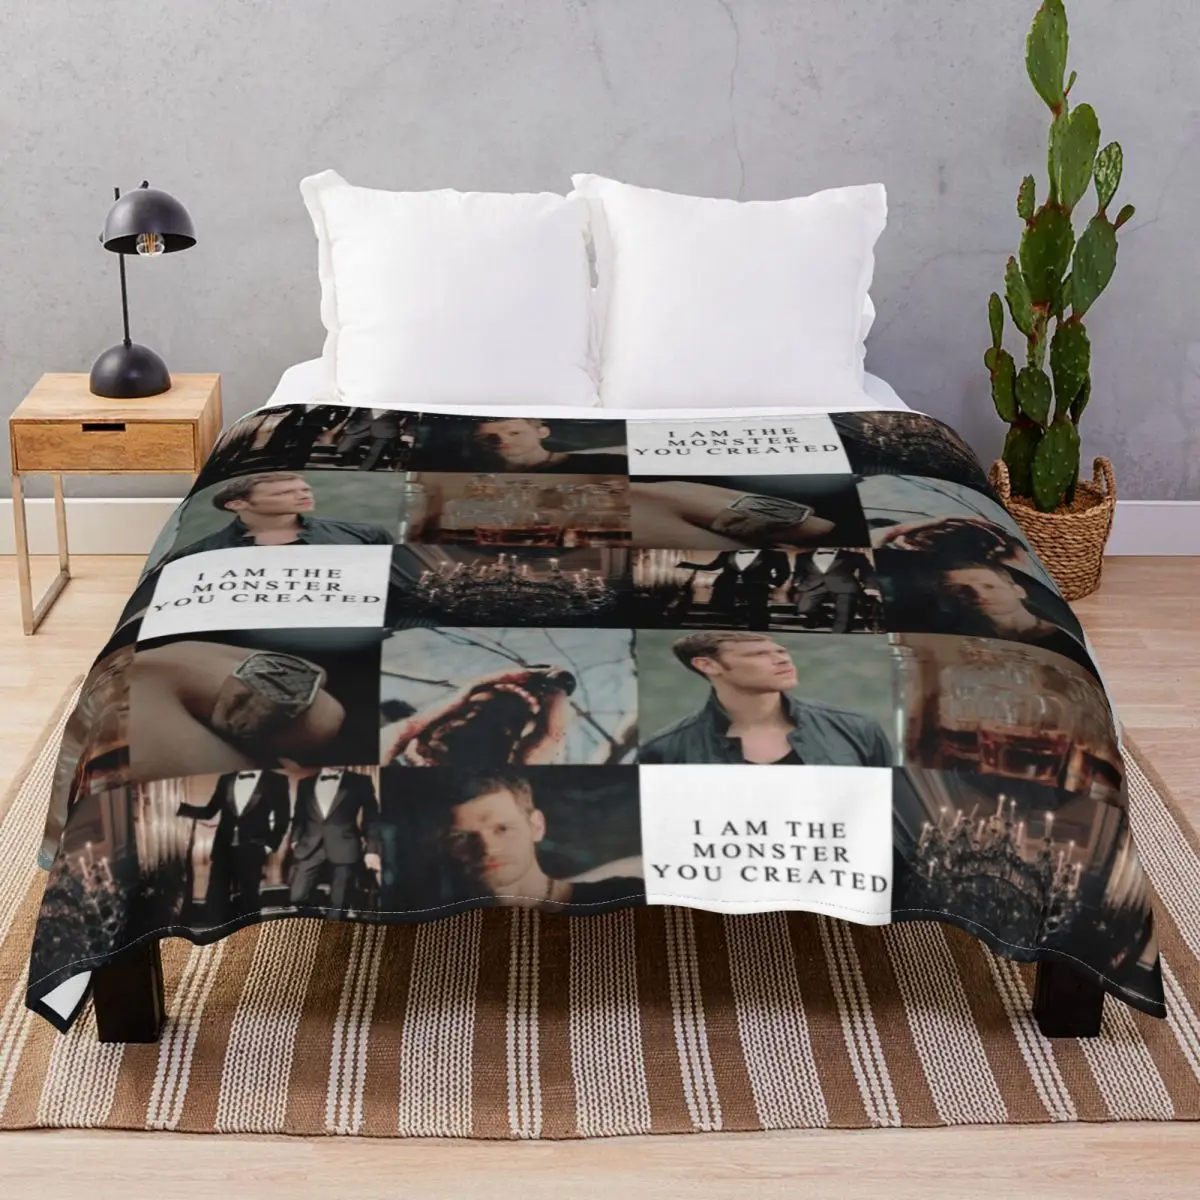 Klaus Mikaelson The Originals Blanket Fleece Printed Comfortable Unisex Throw Blankets for Bed Sofa Camp Office